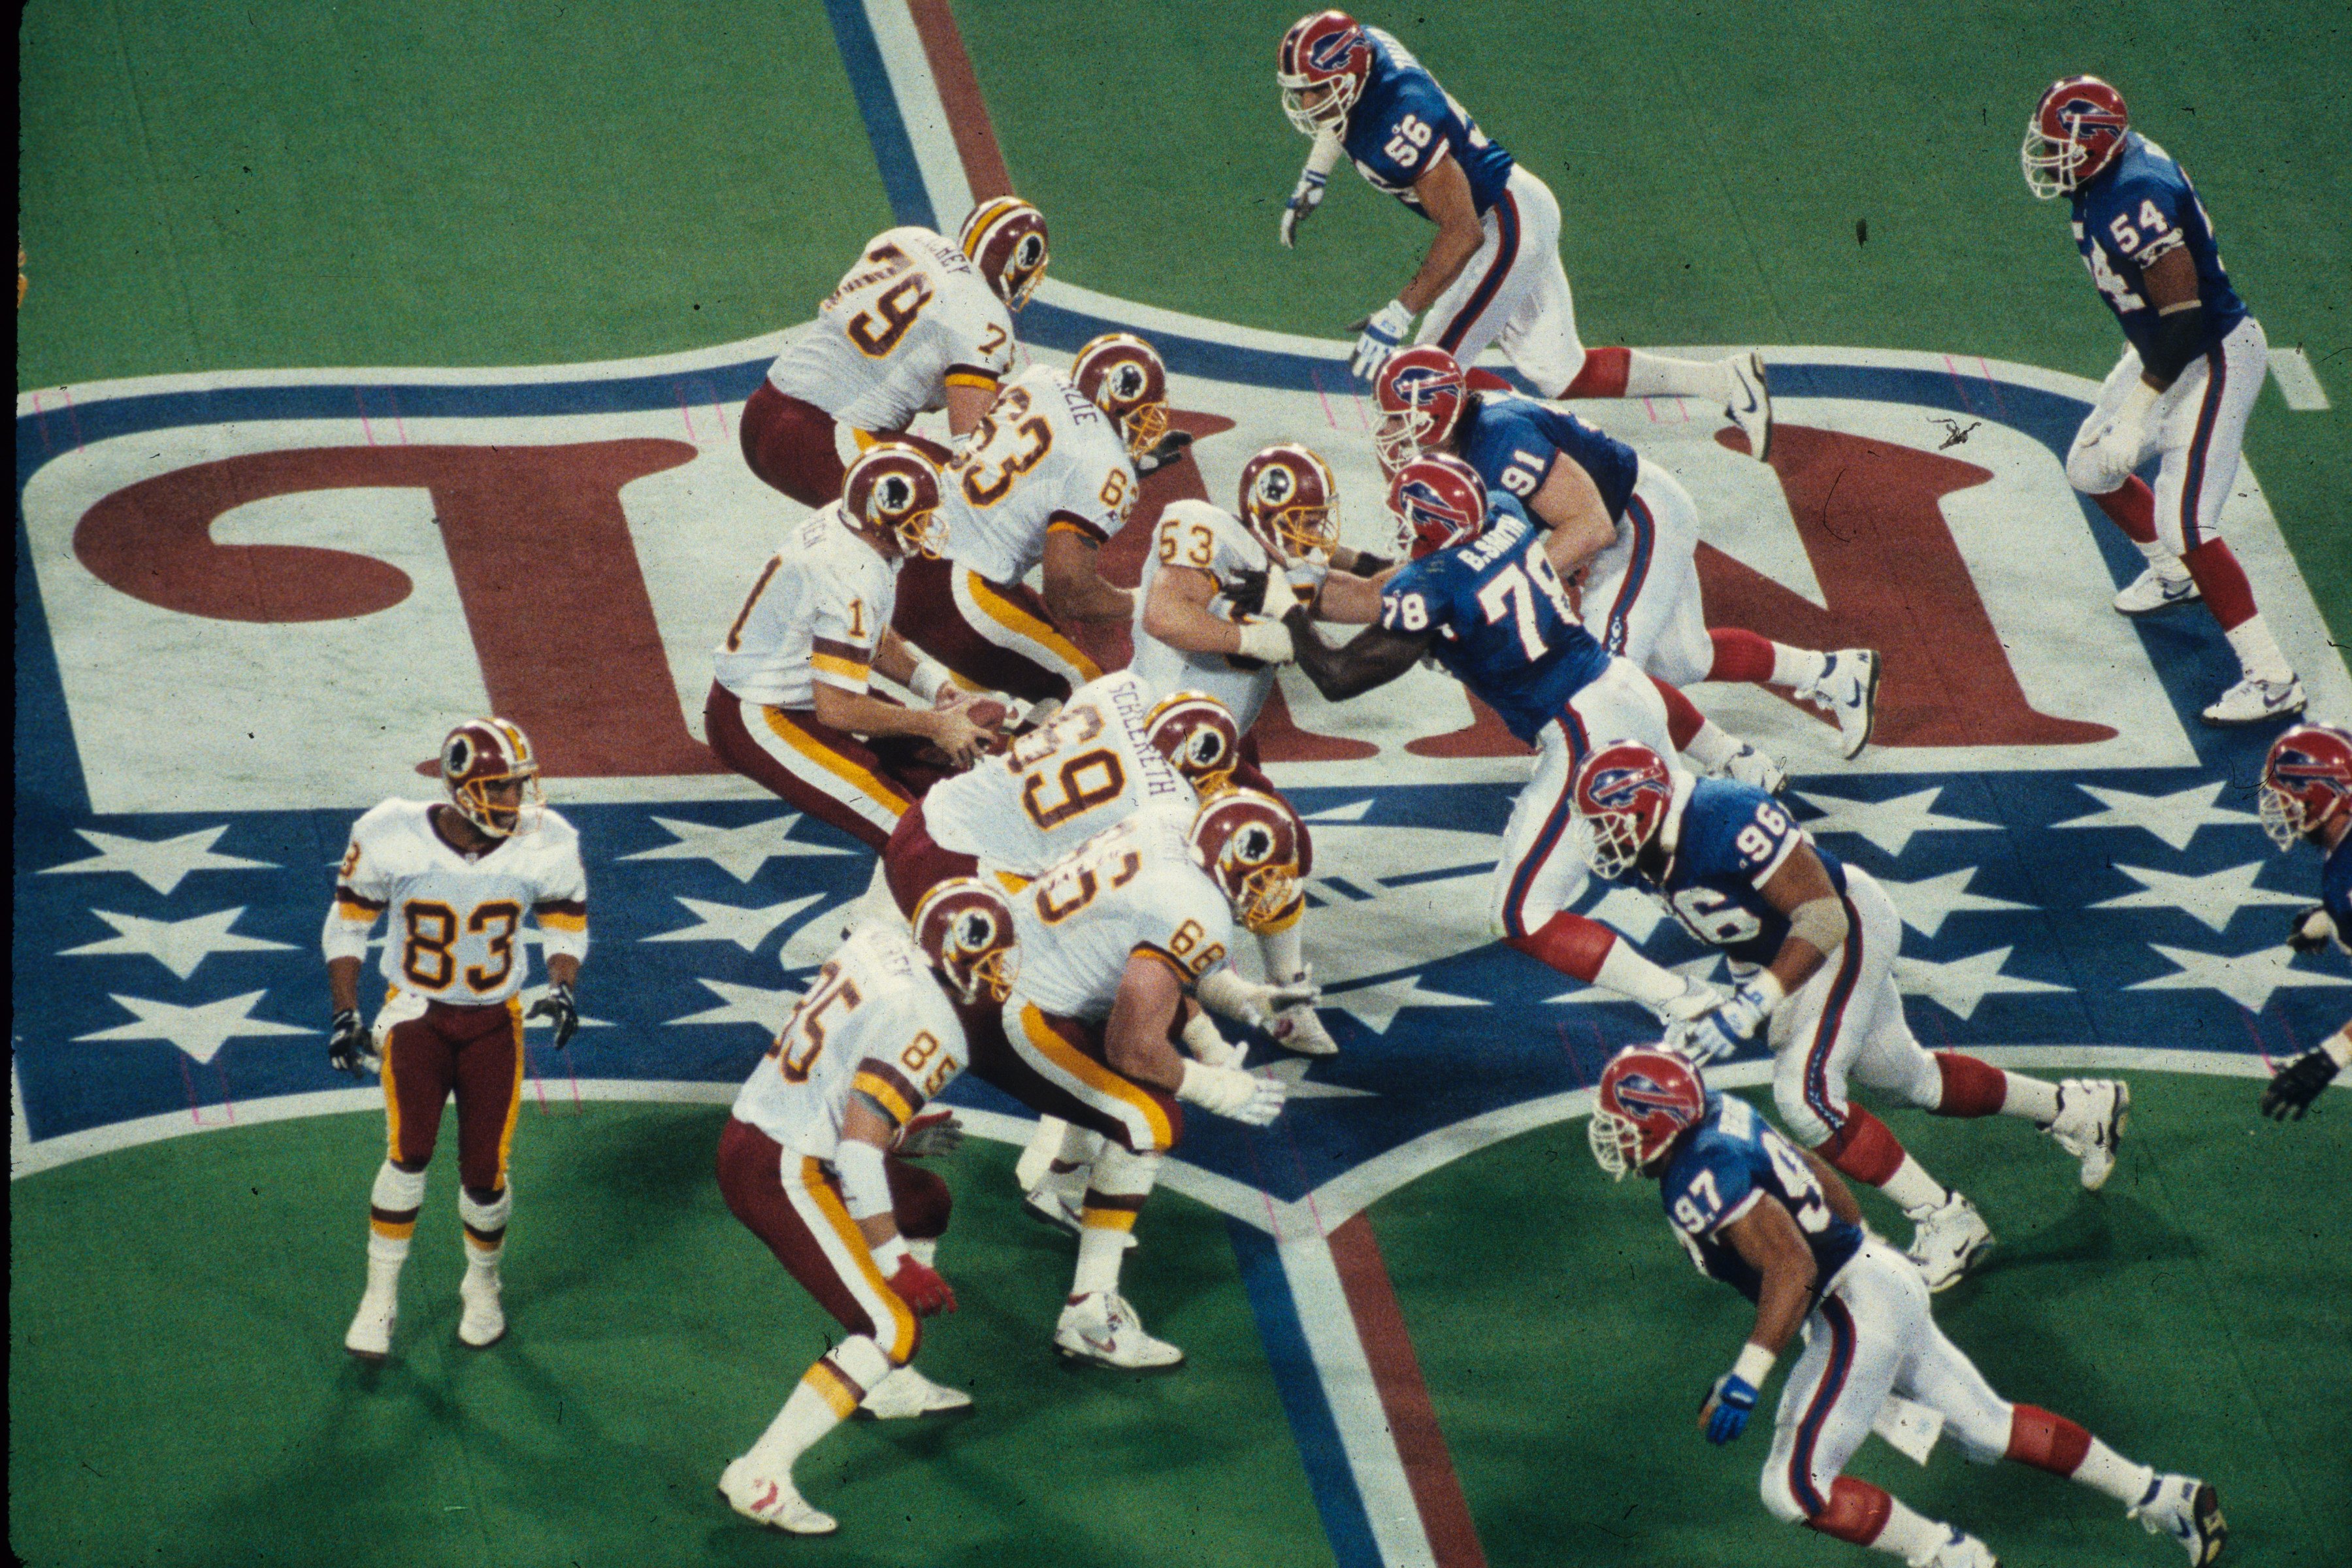 The Simpsons predict the Super Bowl again. Quarterback Mark Rypien #11 of the Washington Redskins drops back to pass against the Buffalo Bills in Super Bowl XXVI at the Metrodome on January 26, 1992 in Minneapolis, Minnesota. The Redskins defeated the Bills 37-24. (Photo by Gin Ellis/Getty Images) (Gin Ellis&mdash;NFL)